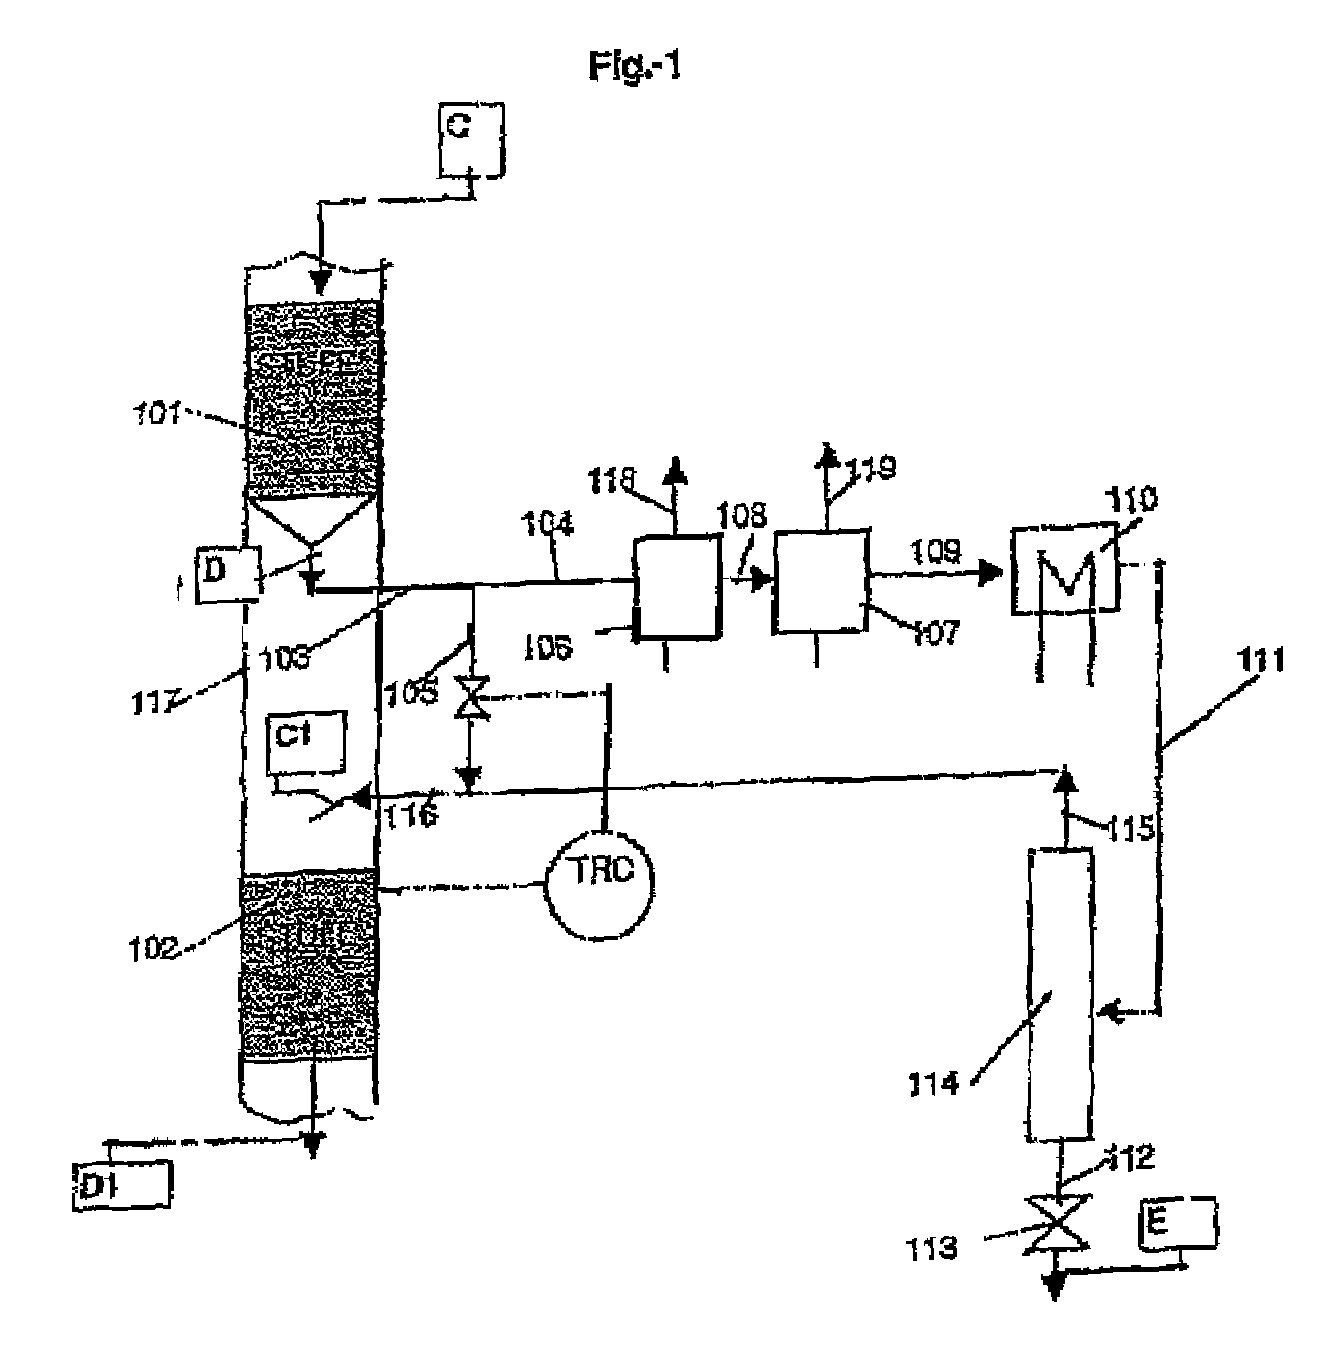 Method for carrying out heterogeneous catalytic exothermic gas phase reactions